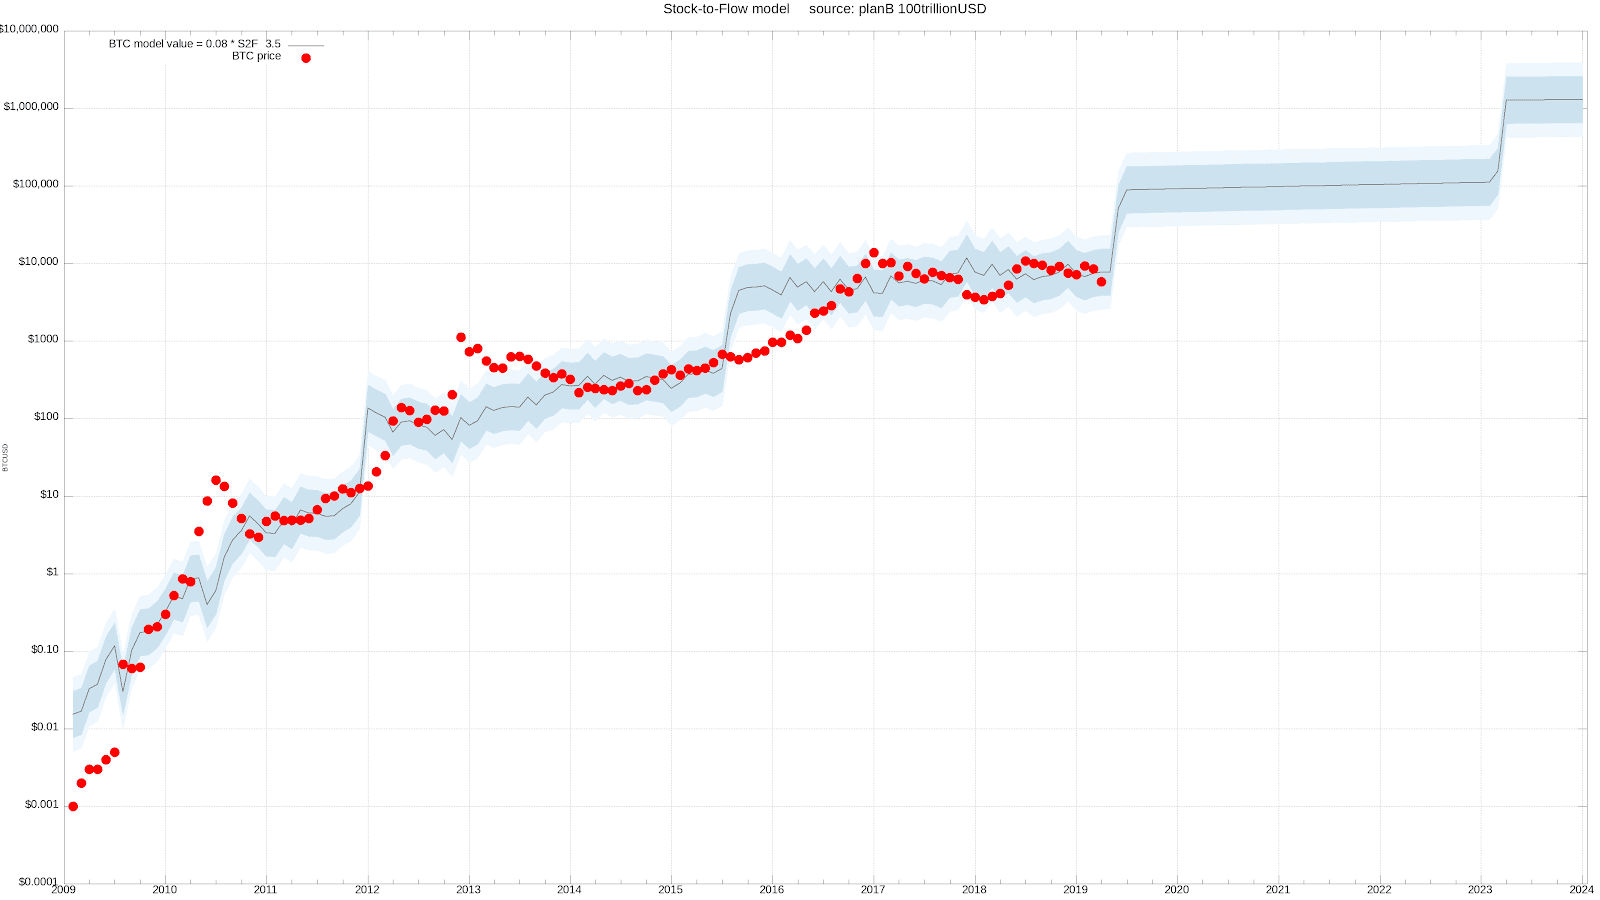 Bitcoin stock-to-flow model with $3,700 dip (most recent spot)